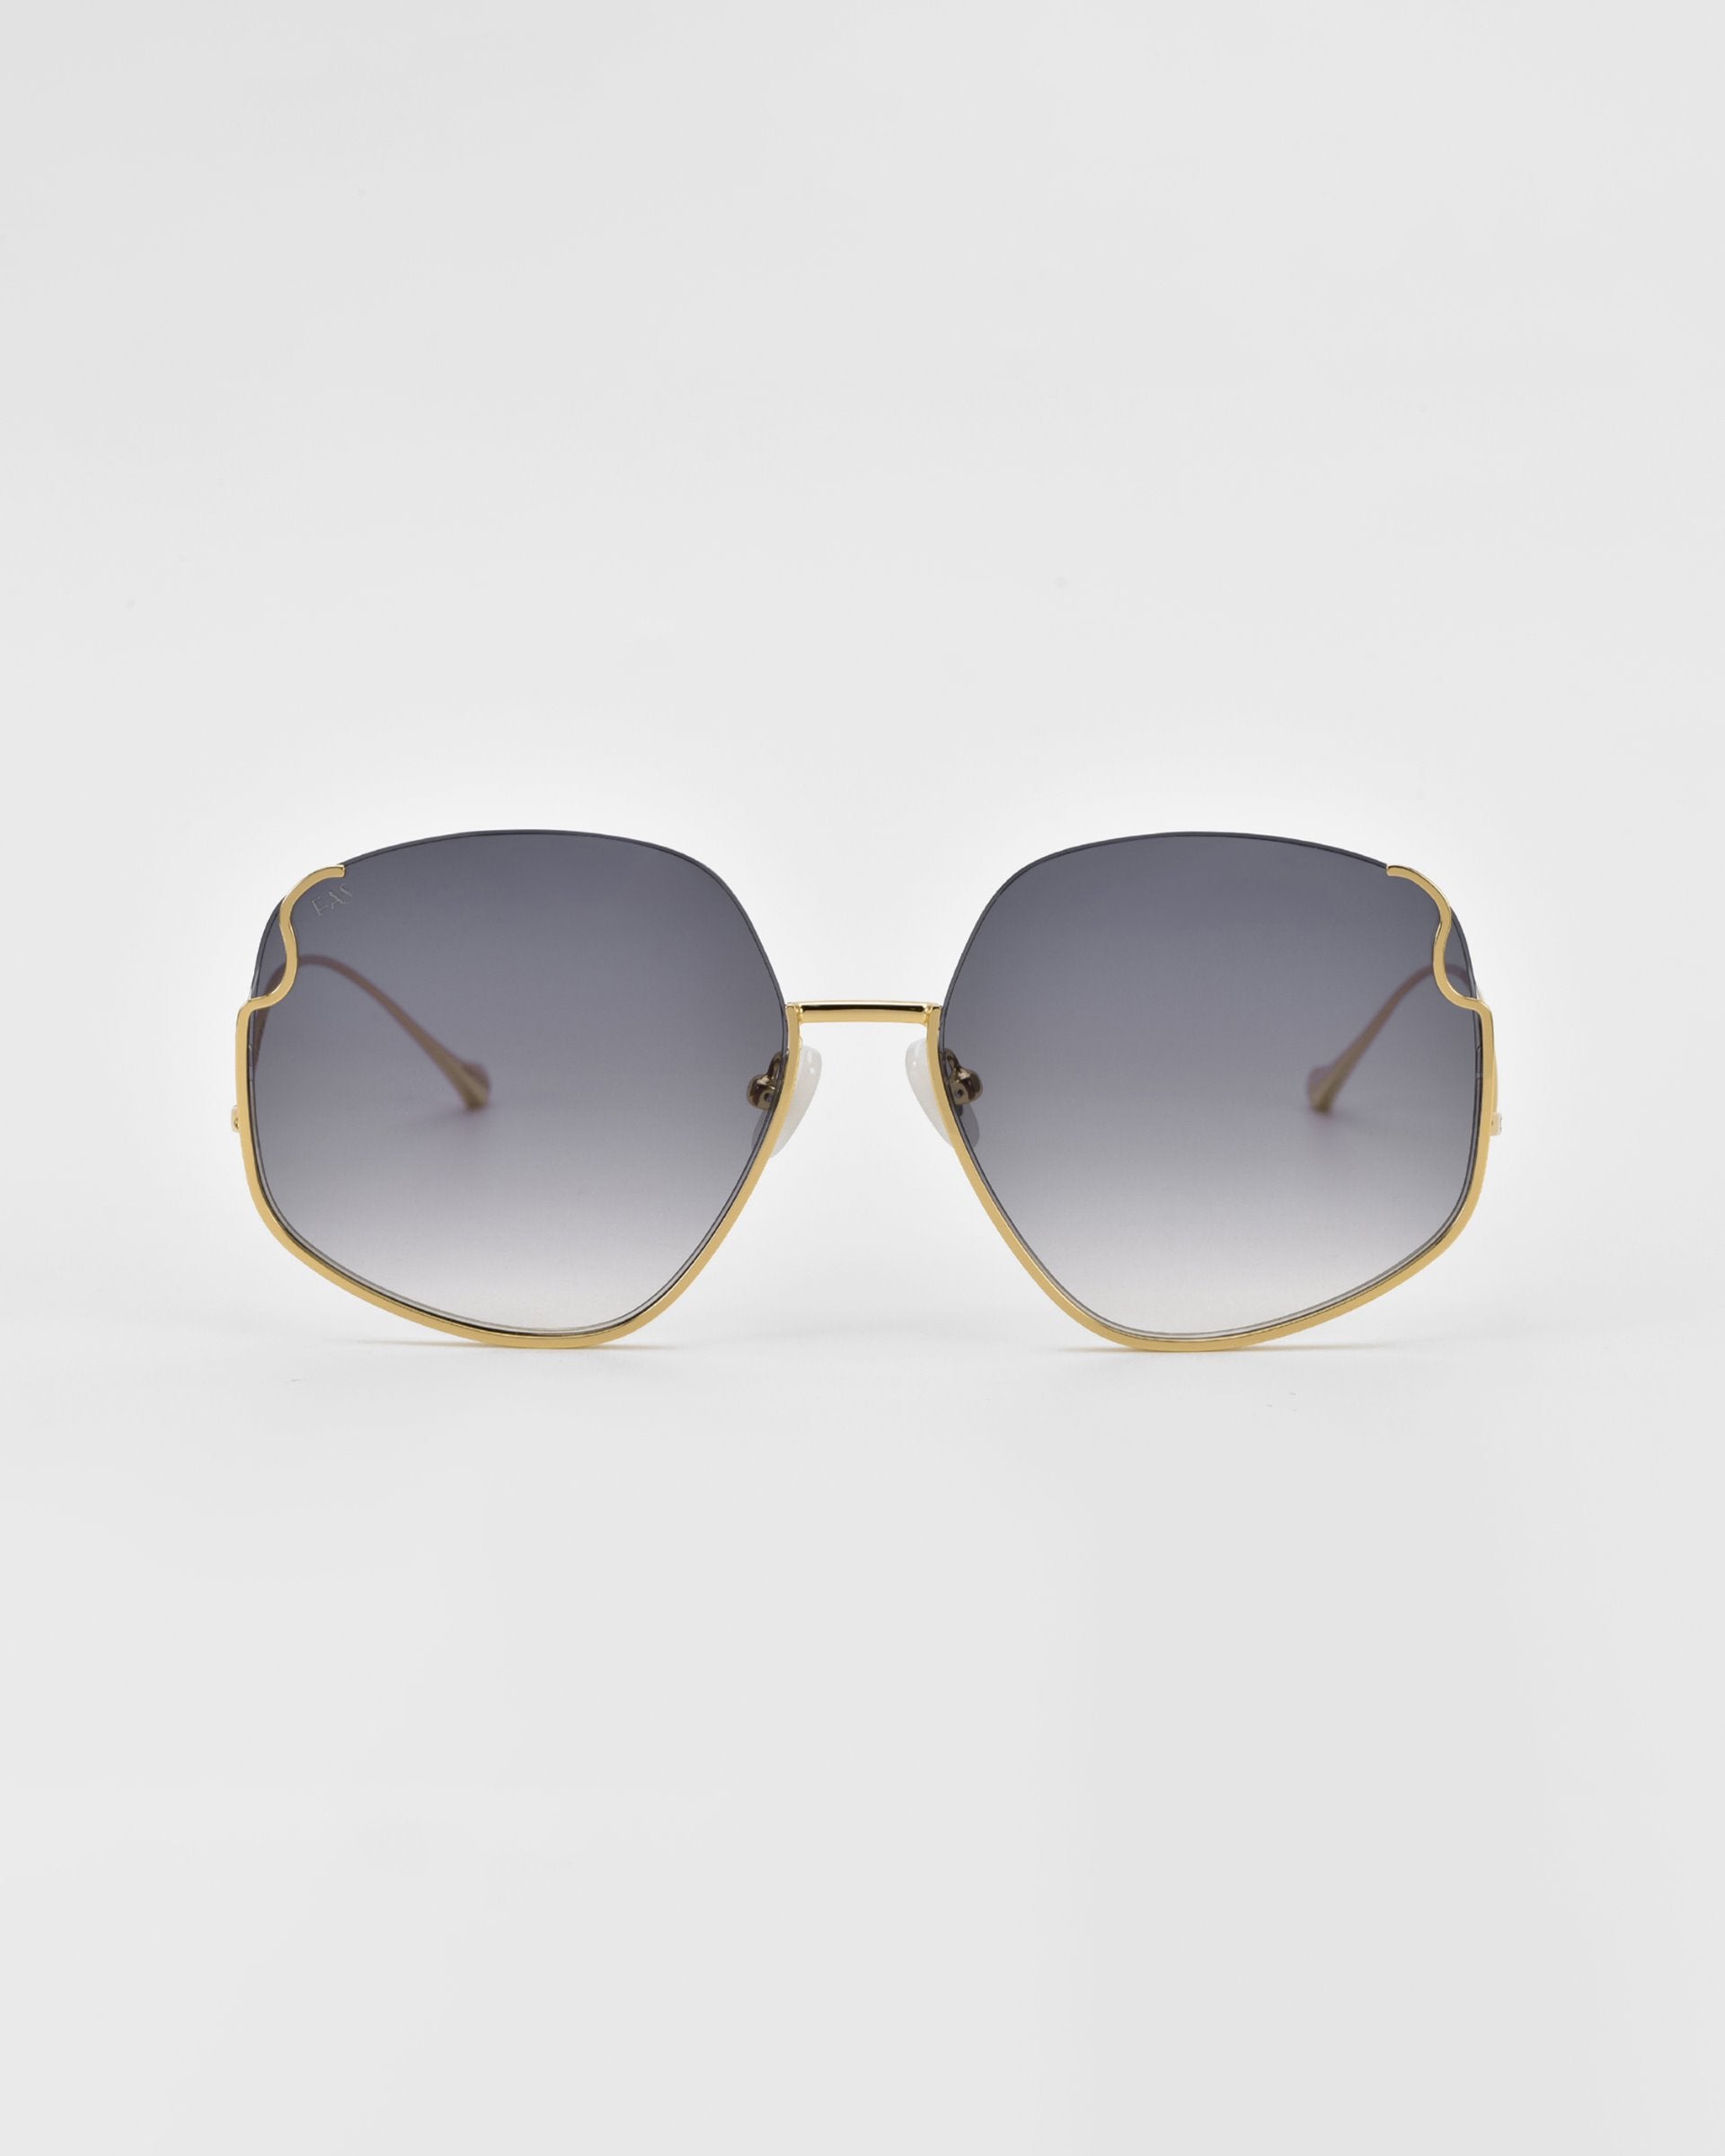 A pair of For Art&#39;s Sake® Drape sunglasses with large, hexagonal lenses featuring a gradient tint from dark grey to light grey. The sunglasses have a thin, gold metal frame with intricate metal detailing and delicate gold temples. The background is a plain, soft white.